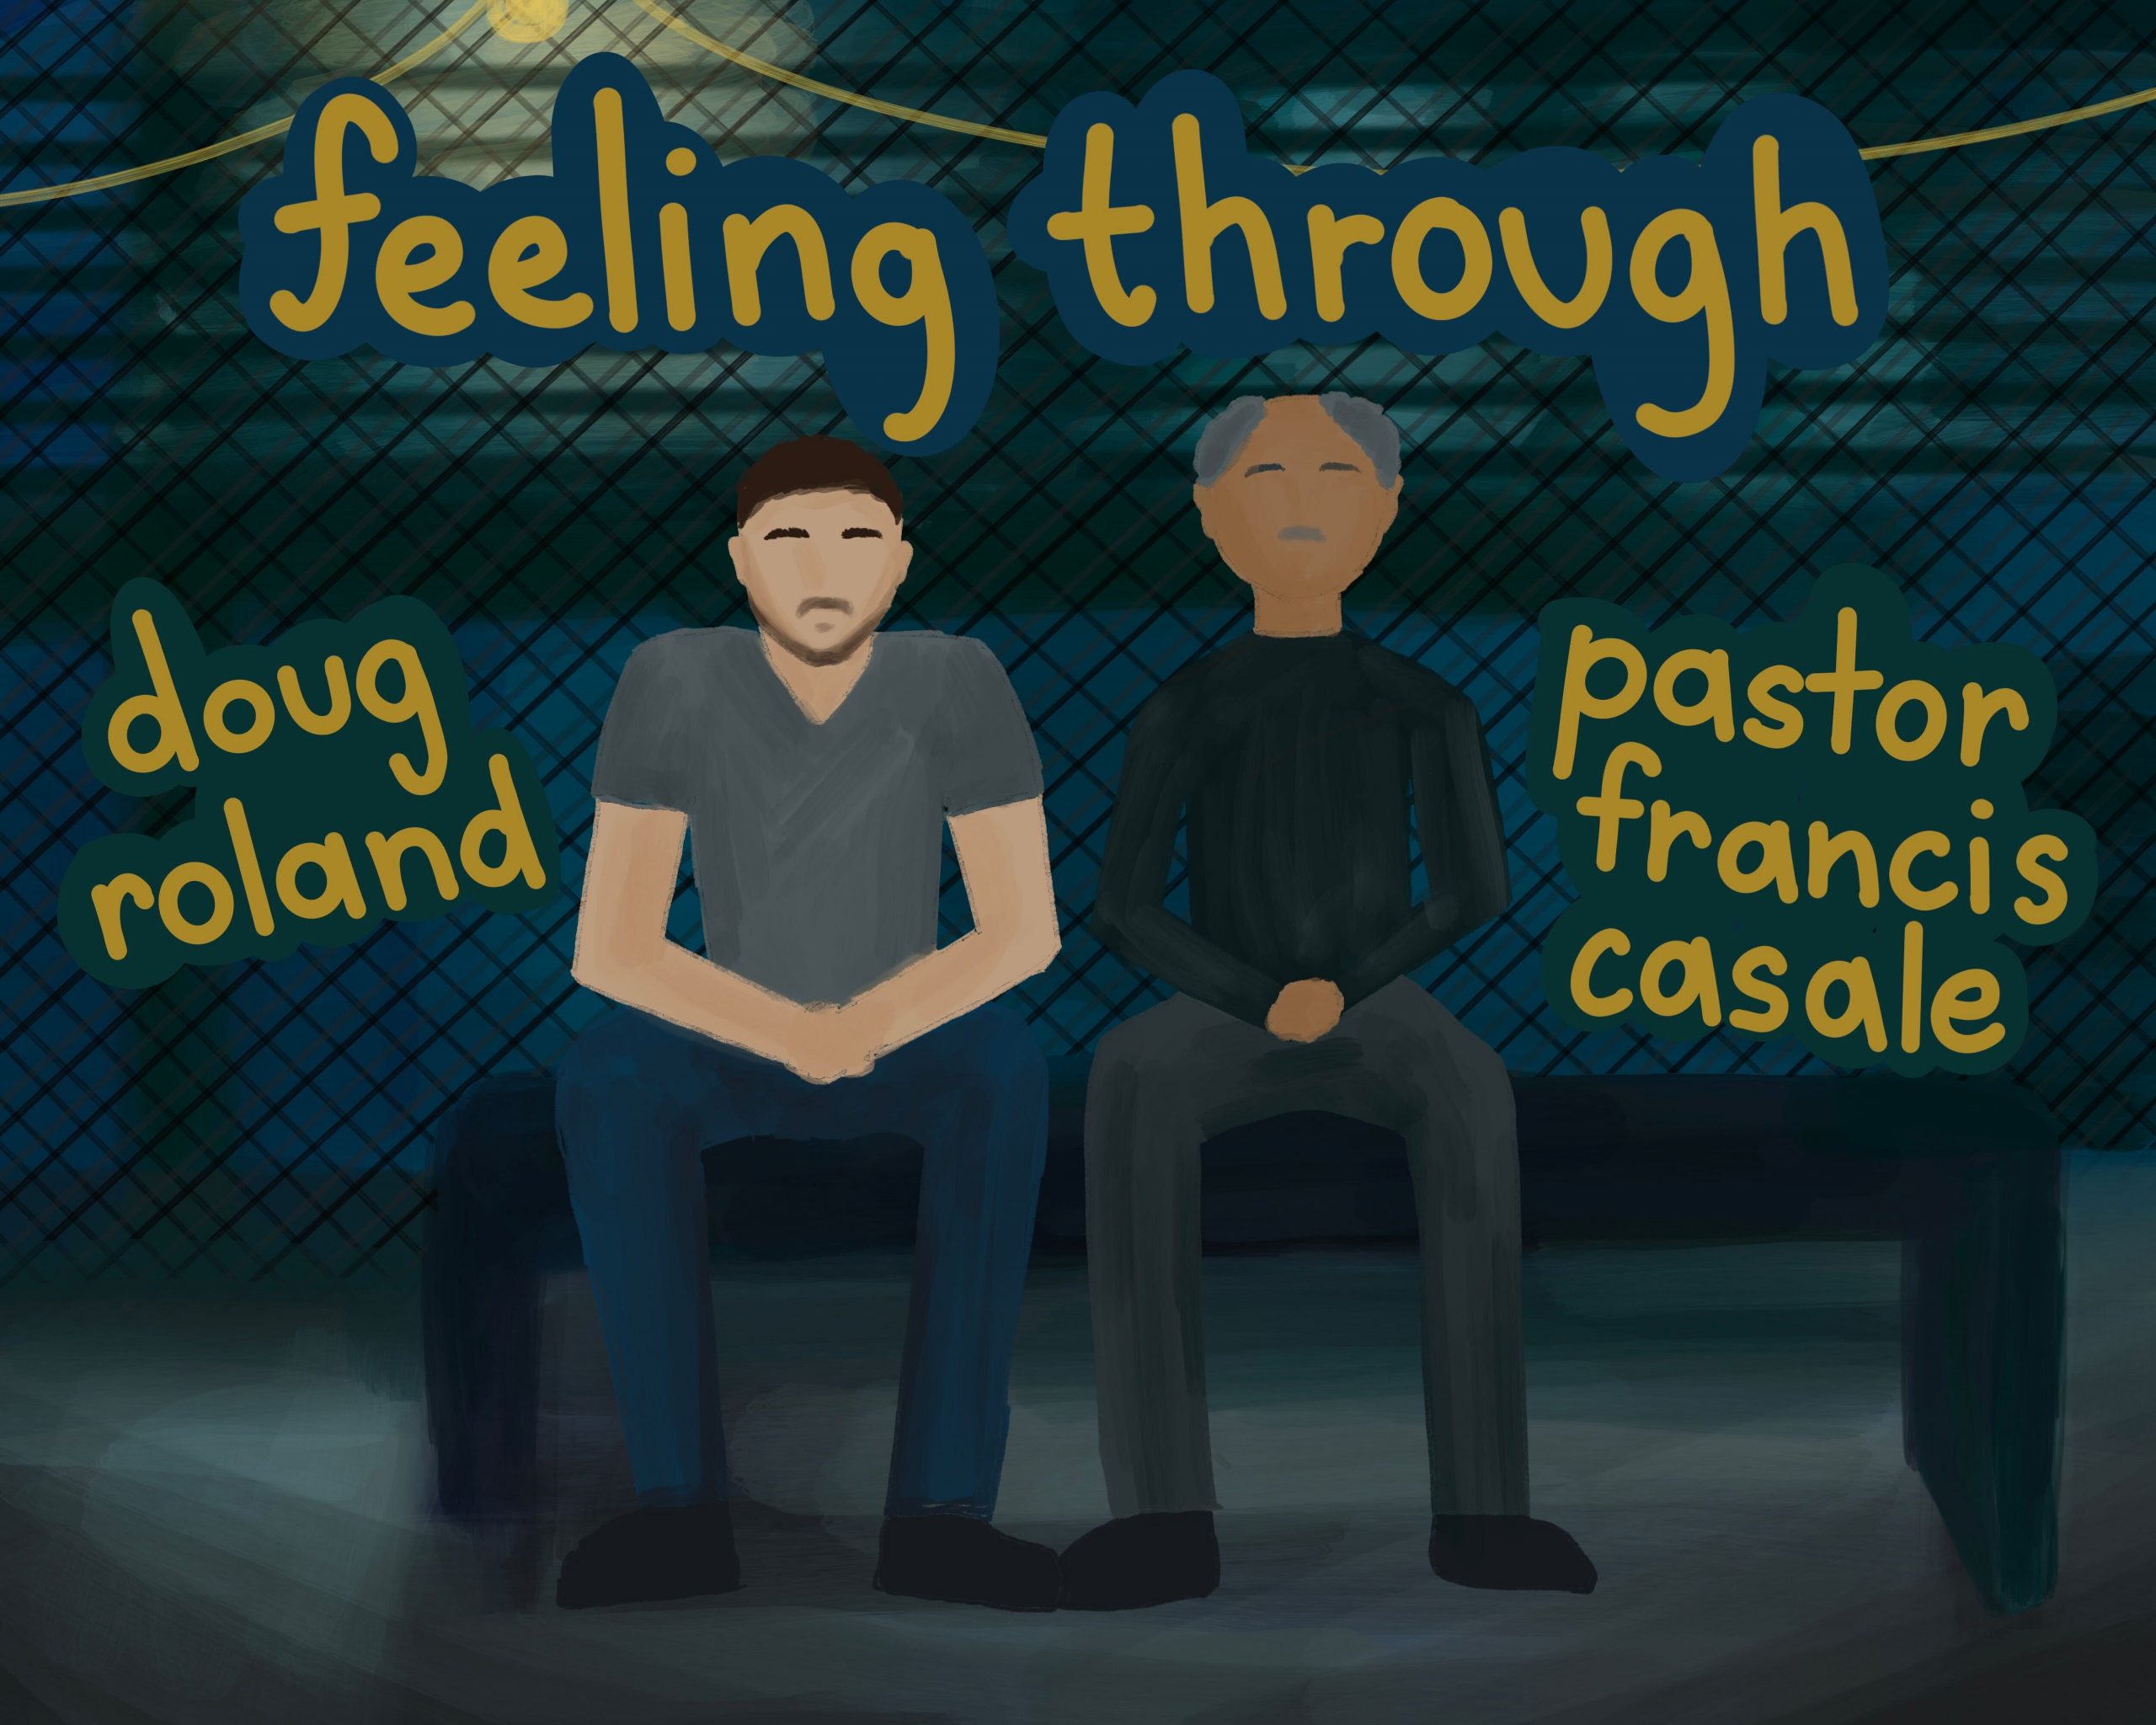 Two people sit at a dark bustop. The text says "feeling through" "doug roland" "pastor francis casale."